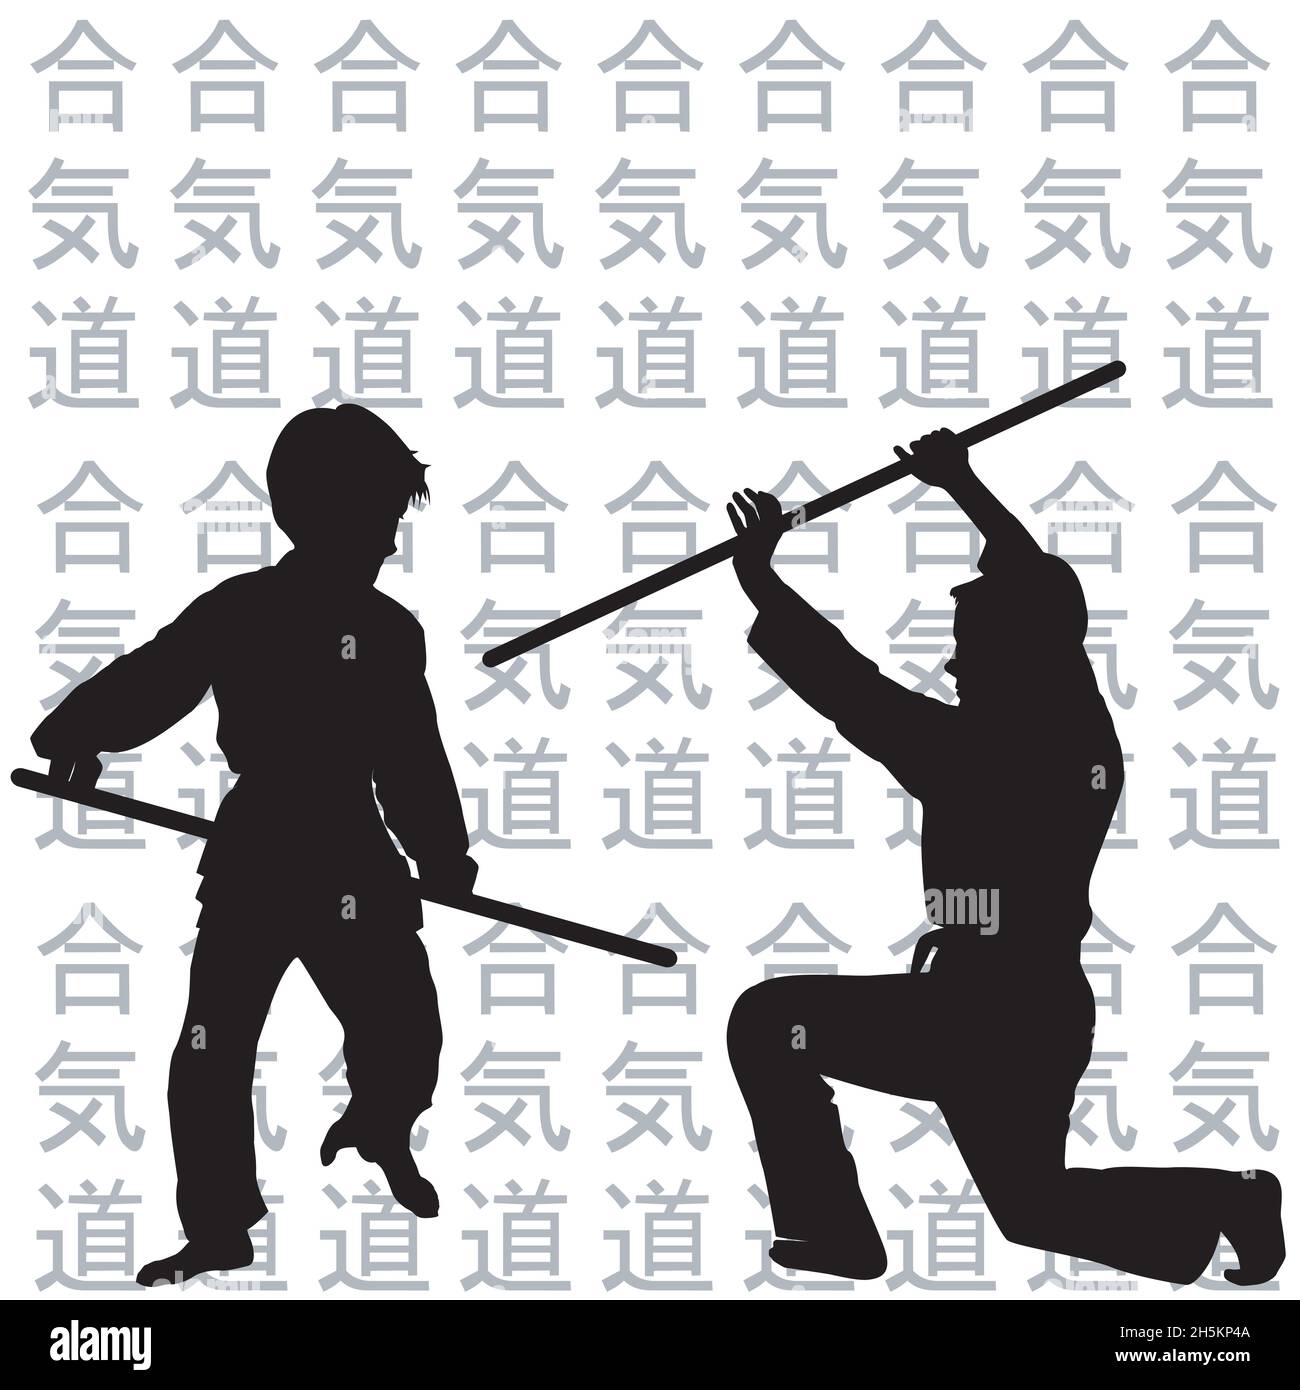 Children black silhouettes practicing Aikido Stock Vector